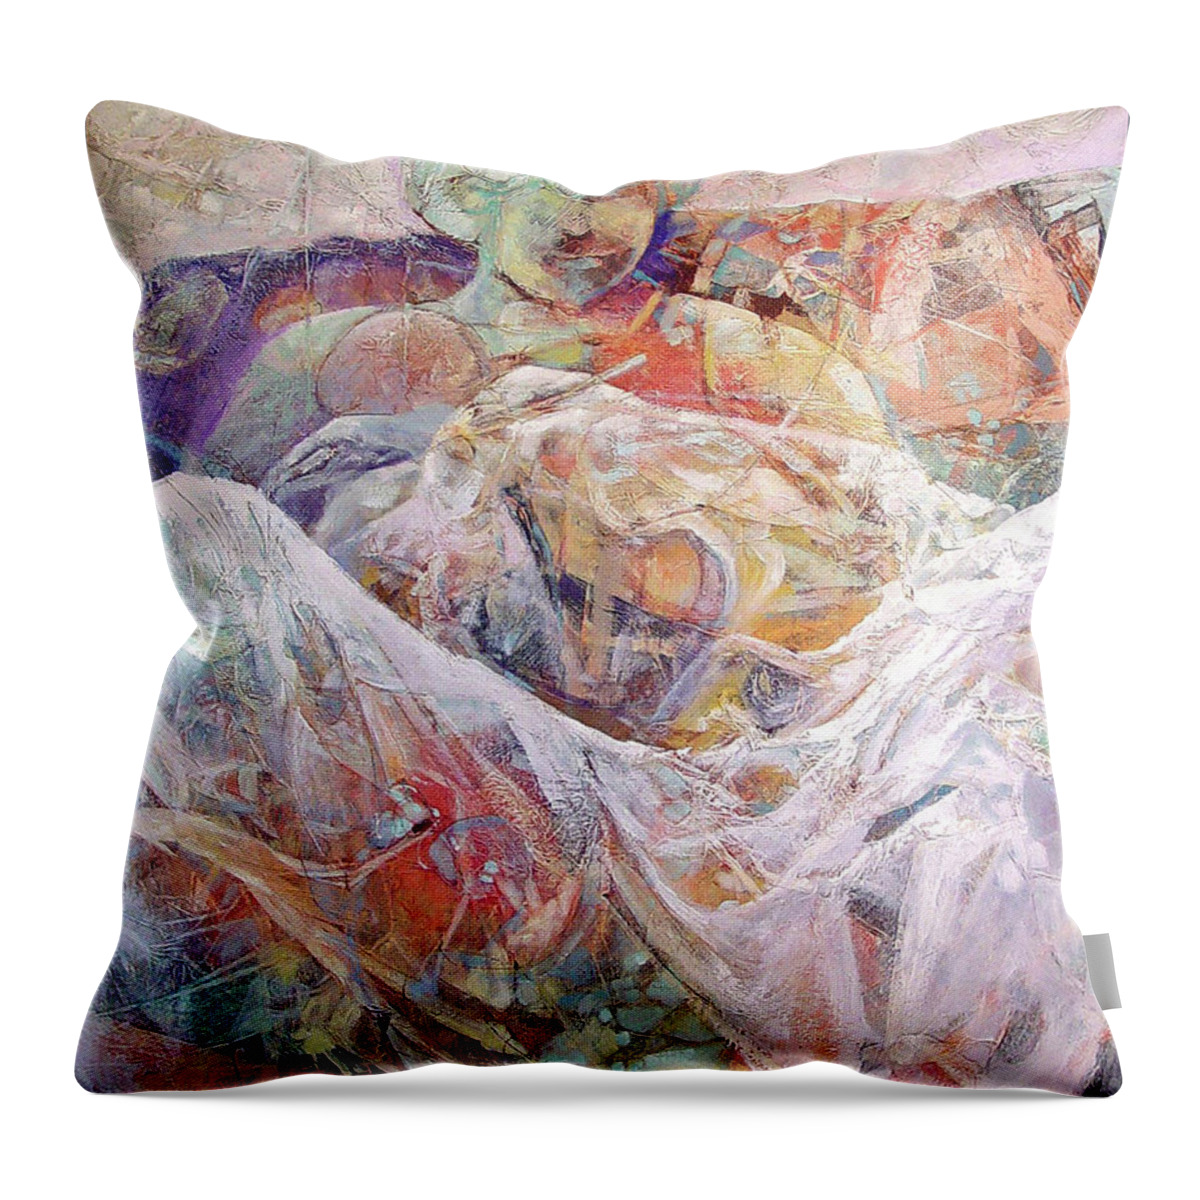  Throw Pillow featuring the painting New Arrival by Dale Witherow